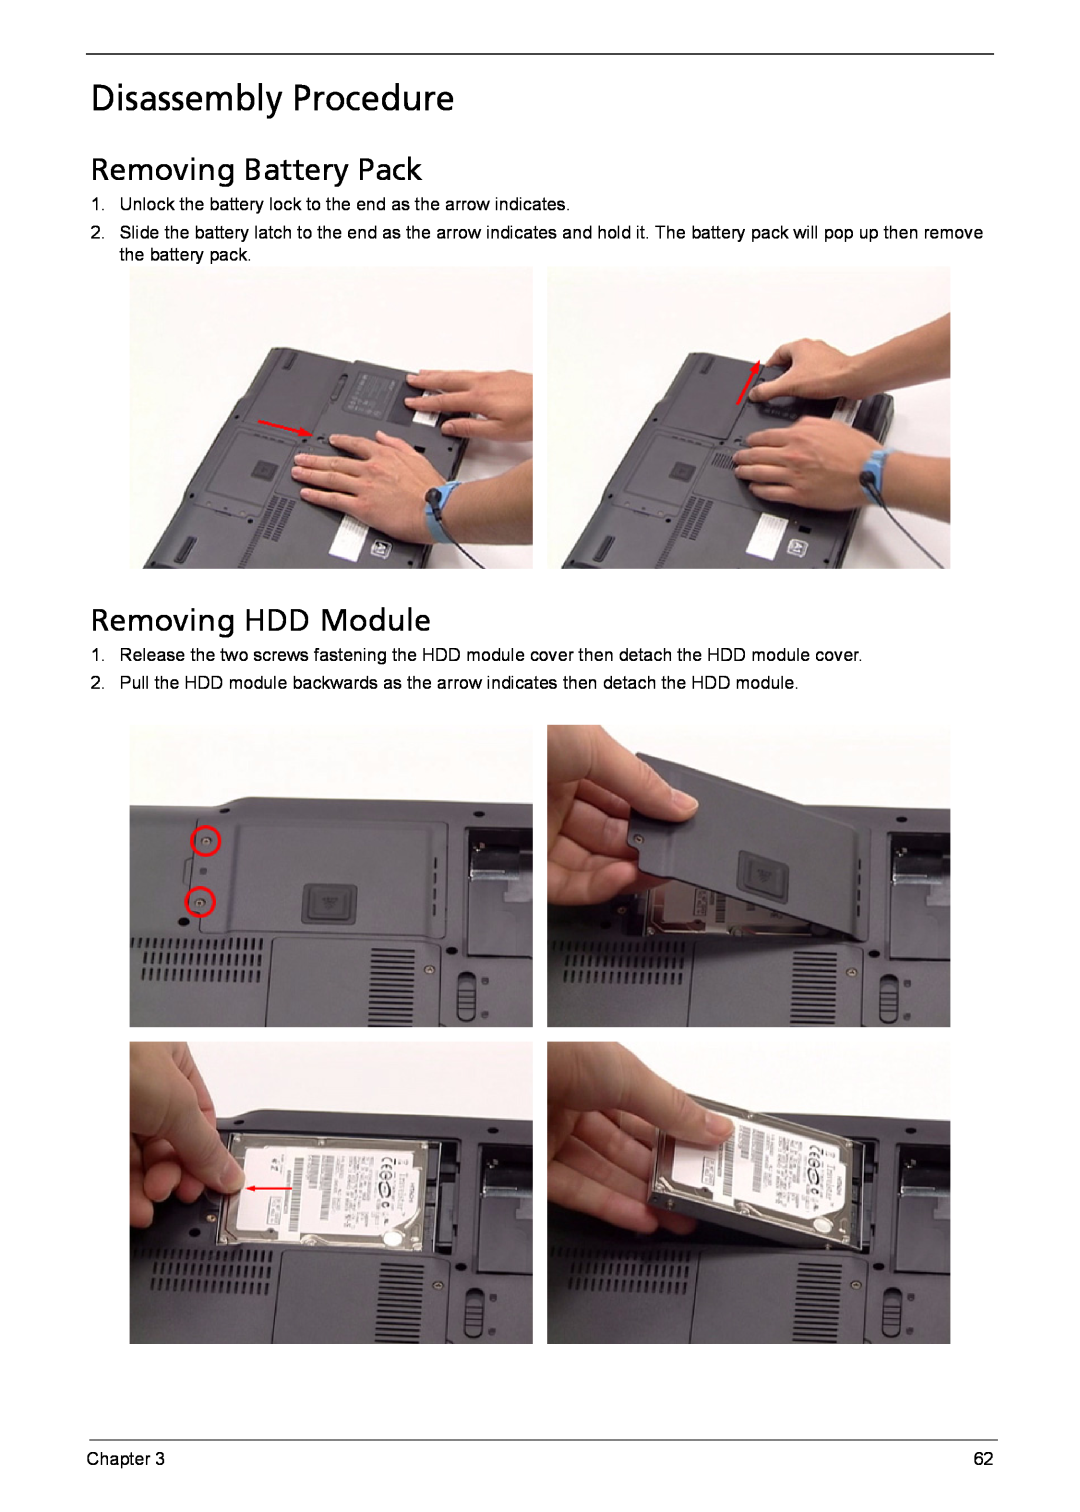 Acer 6410, 6460 manual Disassembly Procedure, Removing Battery Pack, Removing HDD Module 